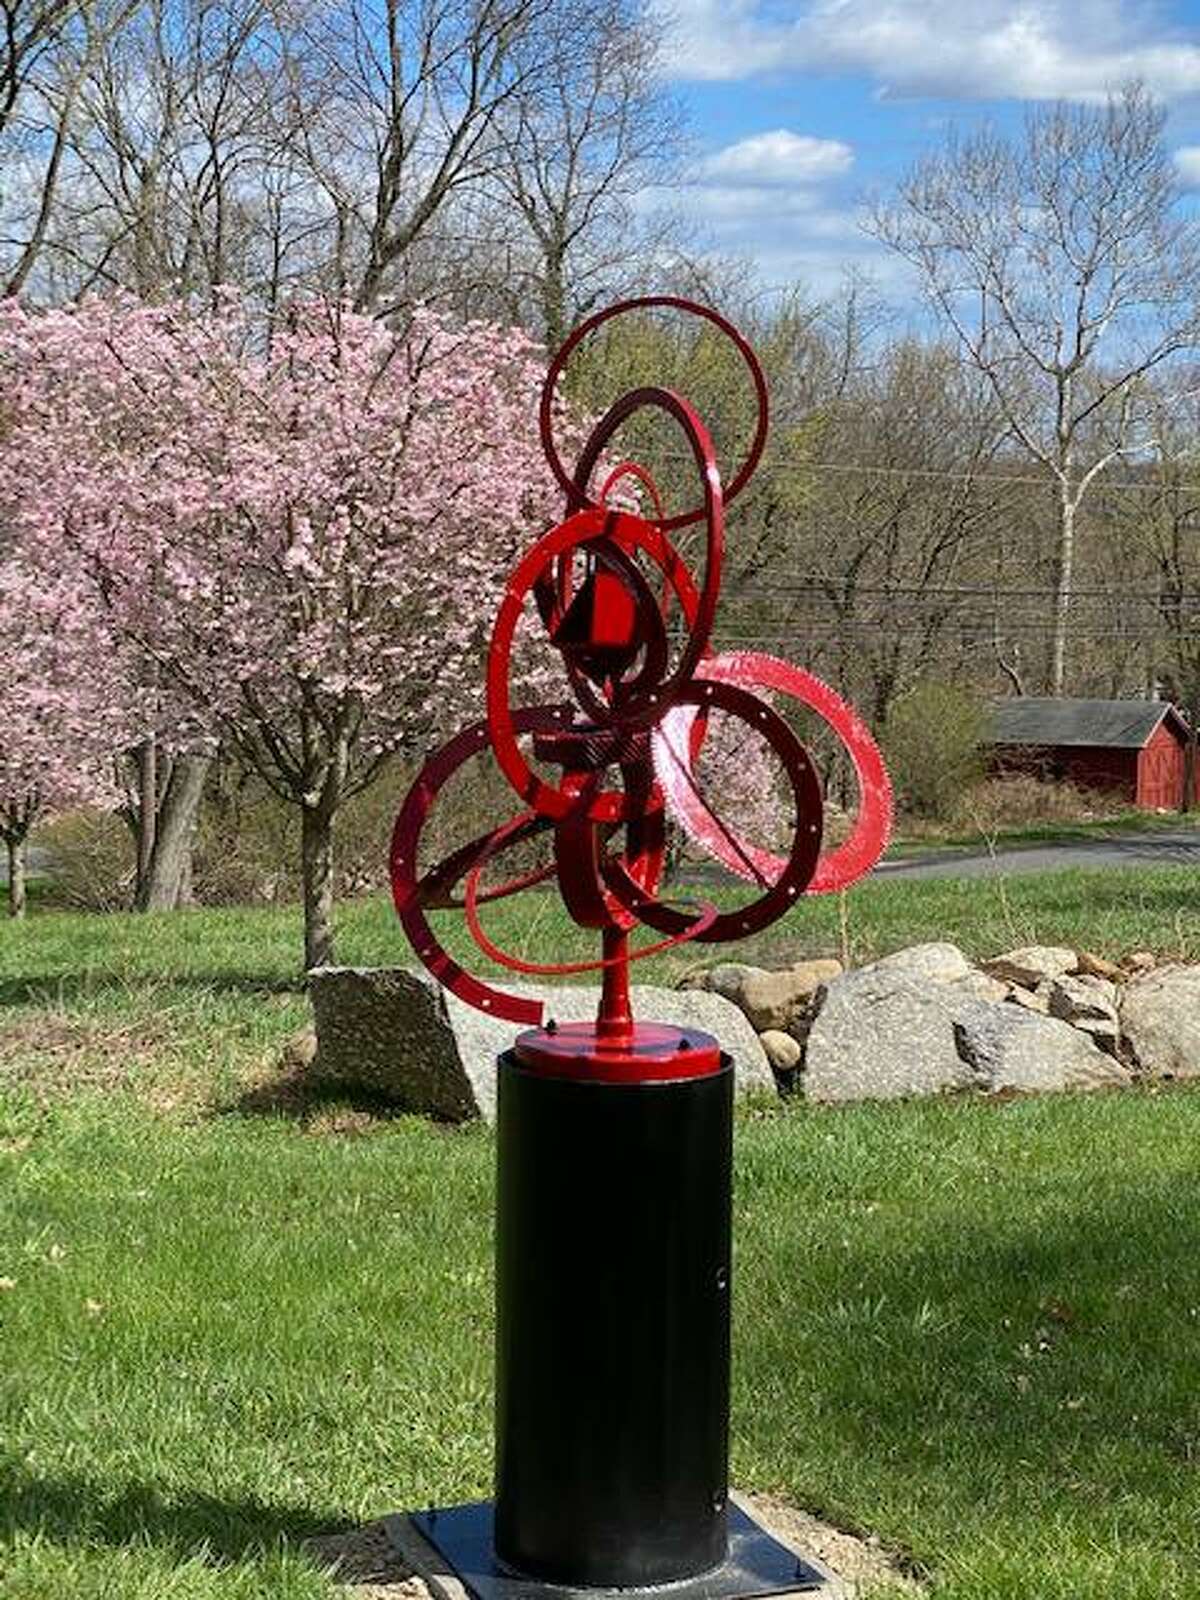 This is one of the five whimsical sculptures recently donated to the Weston Historical Society by the Daniel E. Offutt, III Charitable Trust for the new Daniel E. Offutt, III Sculpture Garden at the Coley Homestead, localed at 104 Weston Road, in Weston. The sculptures were created by Daniel E. Offutt, III at his Weston studio, and were displayed at his former home on Kettle Creek Road in Weston. The public is invited to view the Daniel E. Offutt, III Sculpture Garden. The grounds are open every day from dawn until dusk. Offut was a Weston philanthropist.